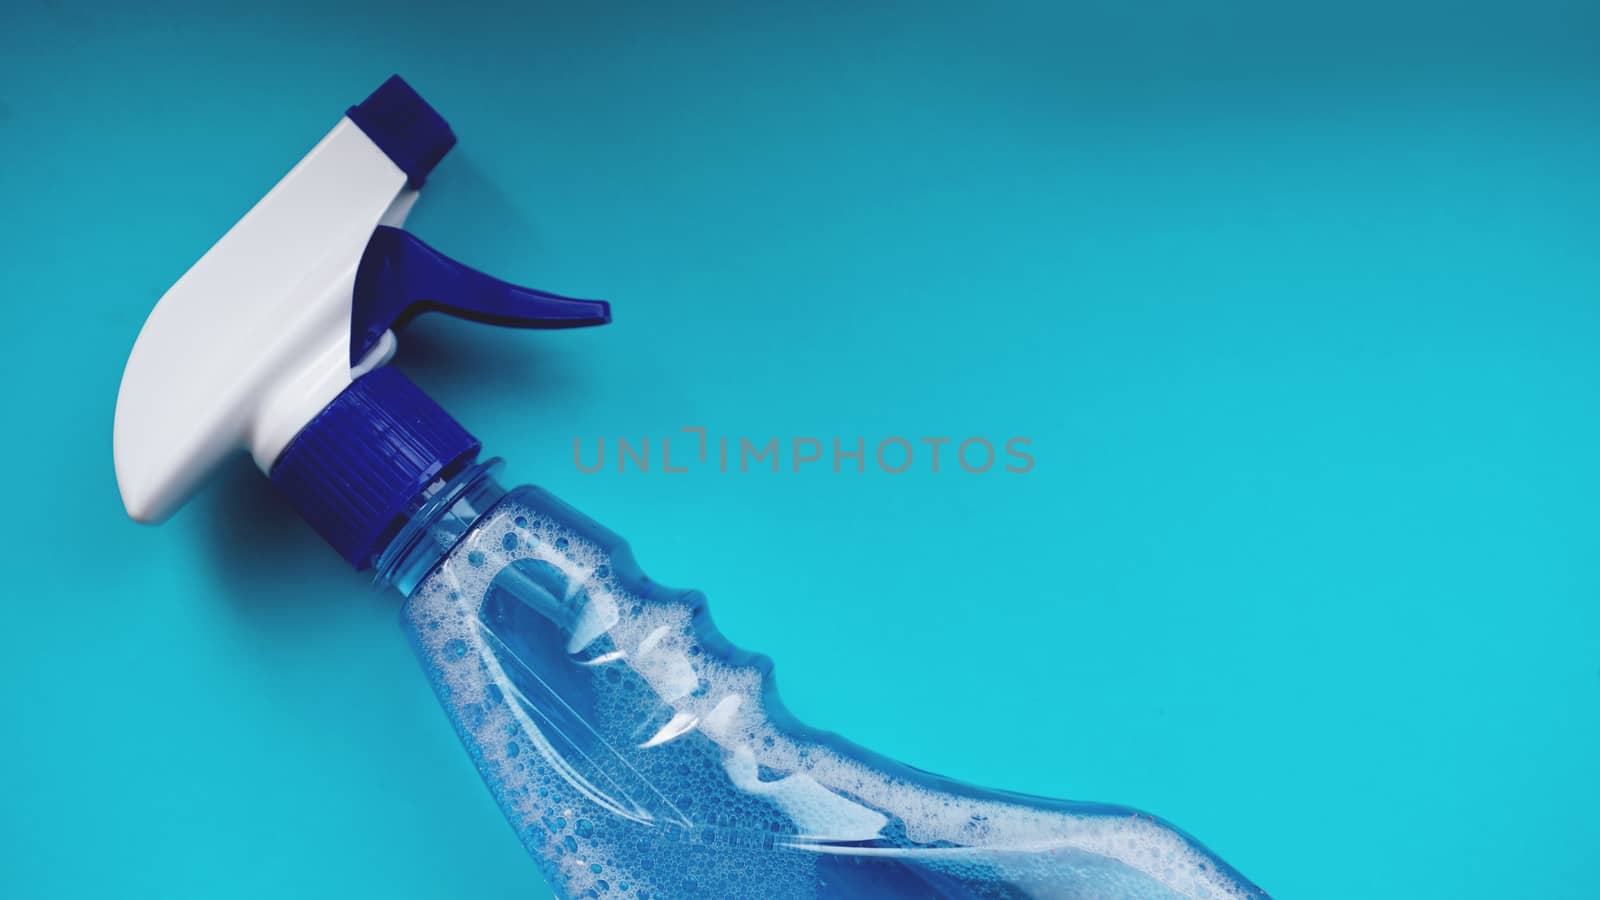 Spray with detergent on blue background. Housework, housekeeping and household concept